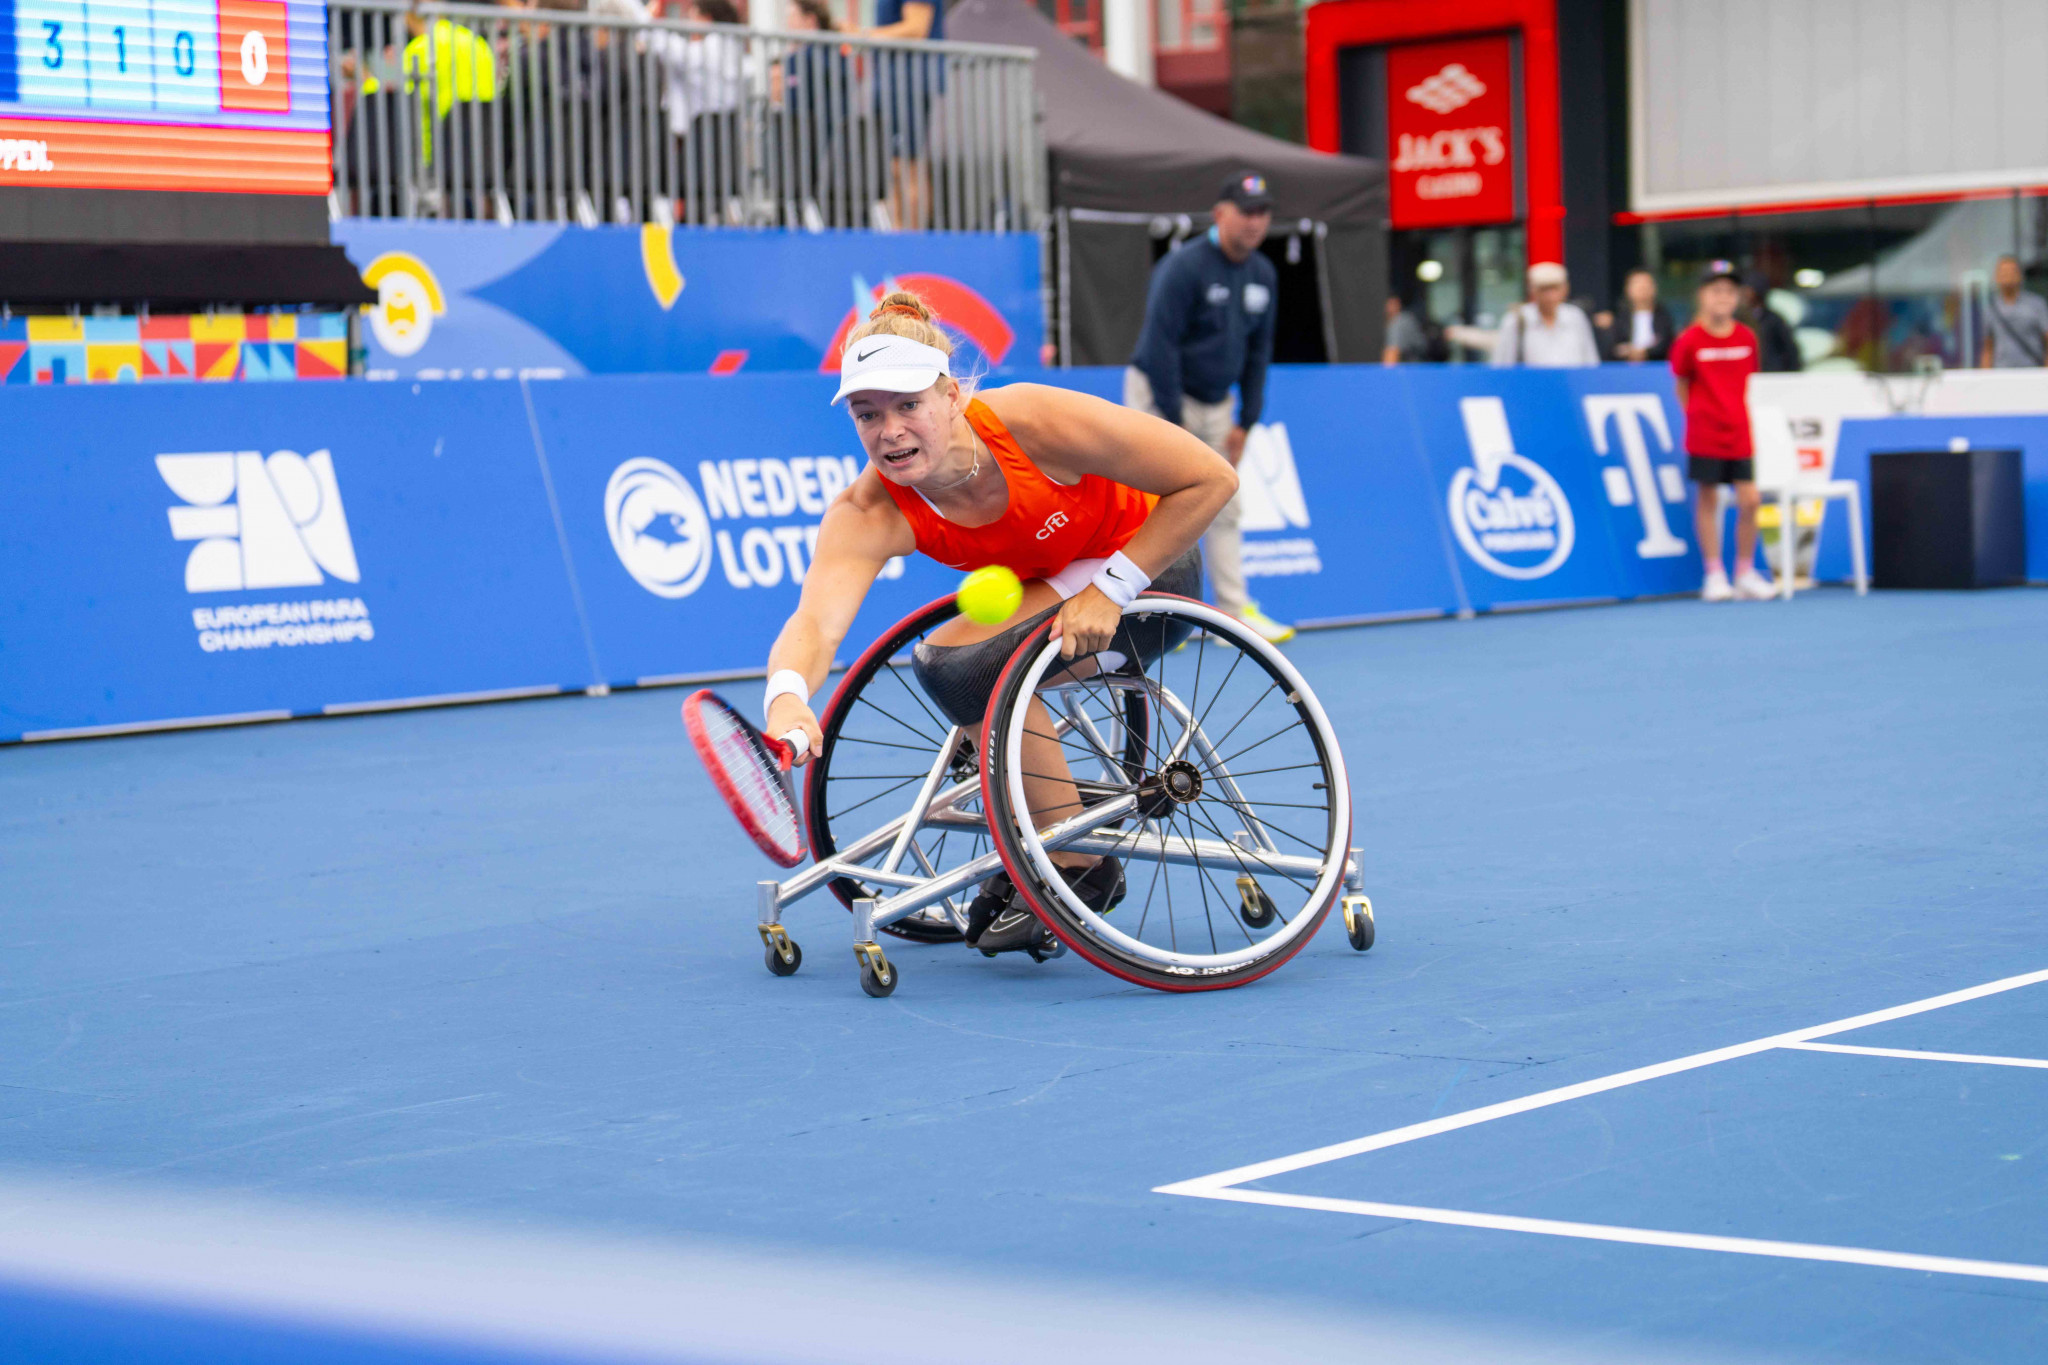 Diede de Groot was born in Woerden which was also the birthplace of fellow wheelchair tennis stars Esther Vergeer and Jiske Griffioen ©EPC